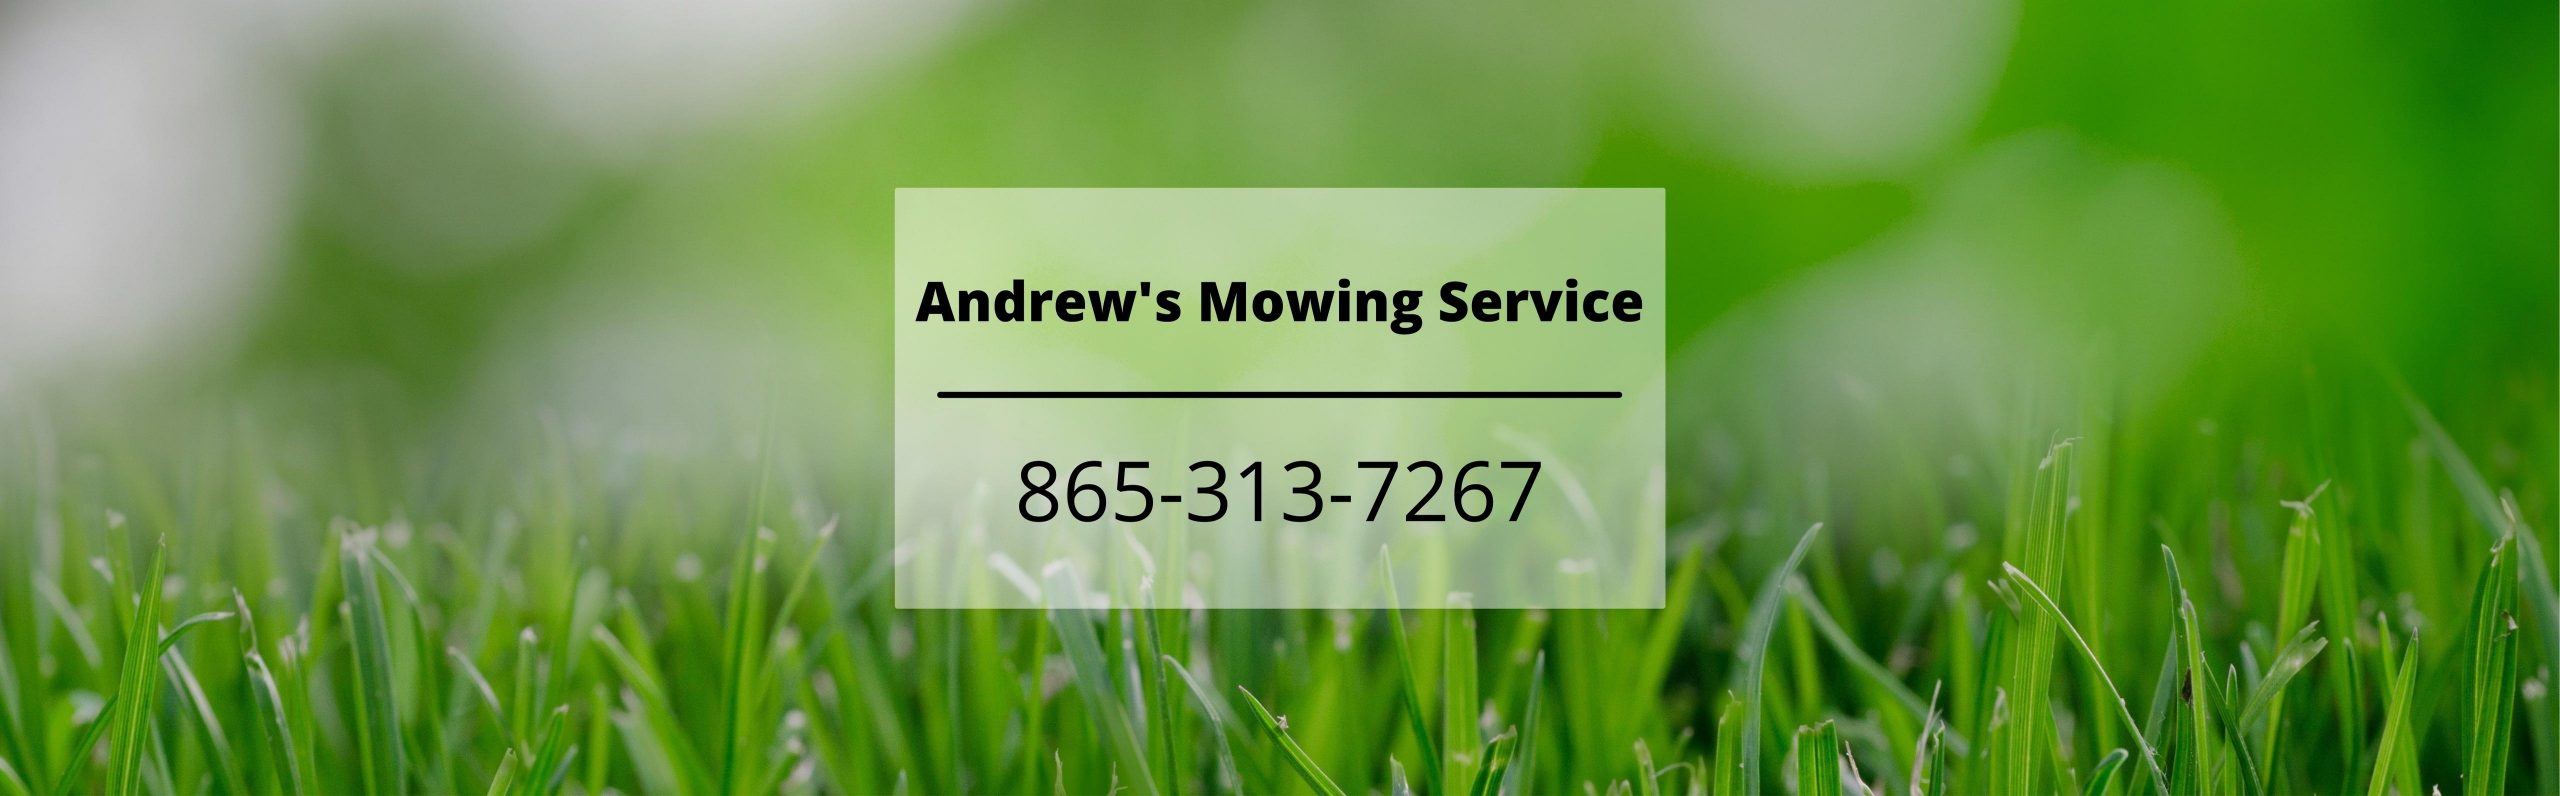 Andrews Mowing and Lawn Care Service in Knoxville TN